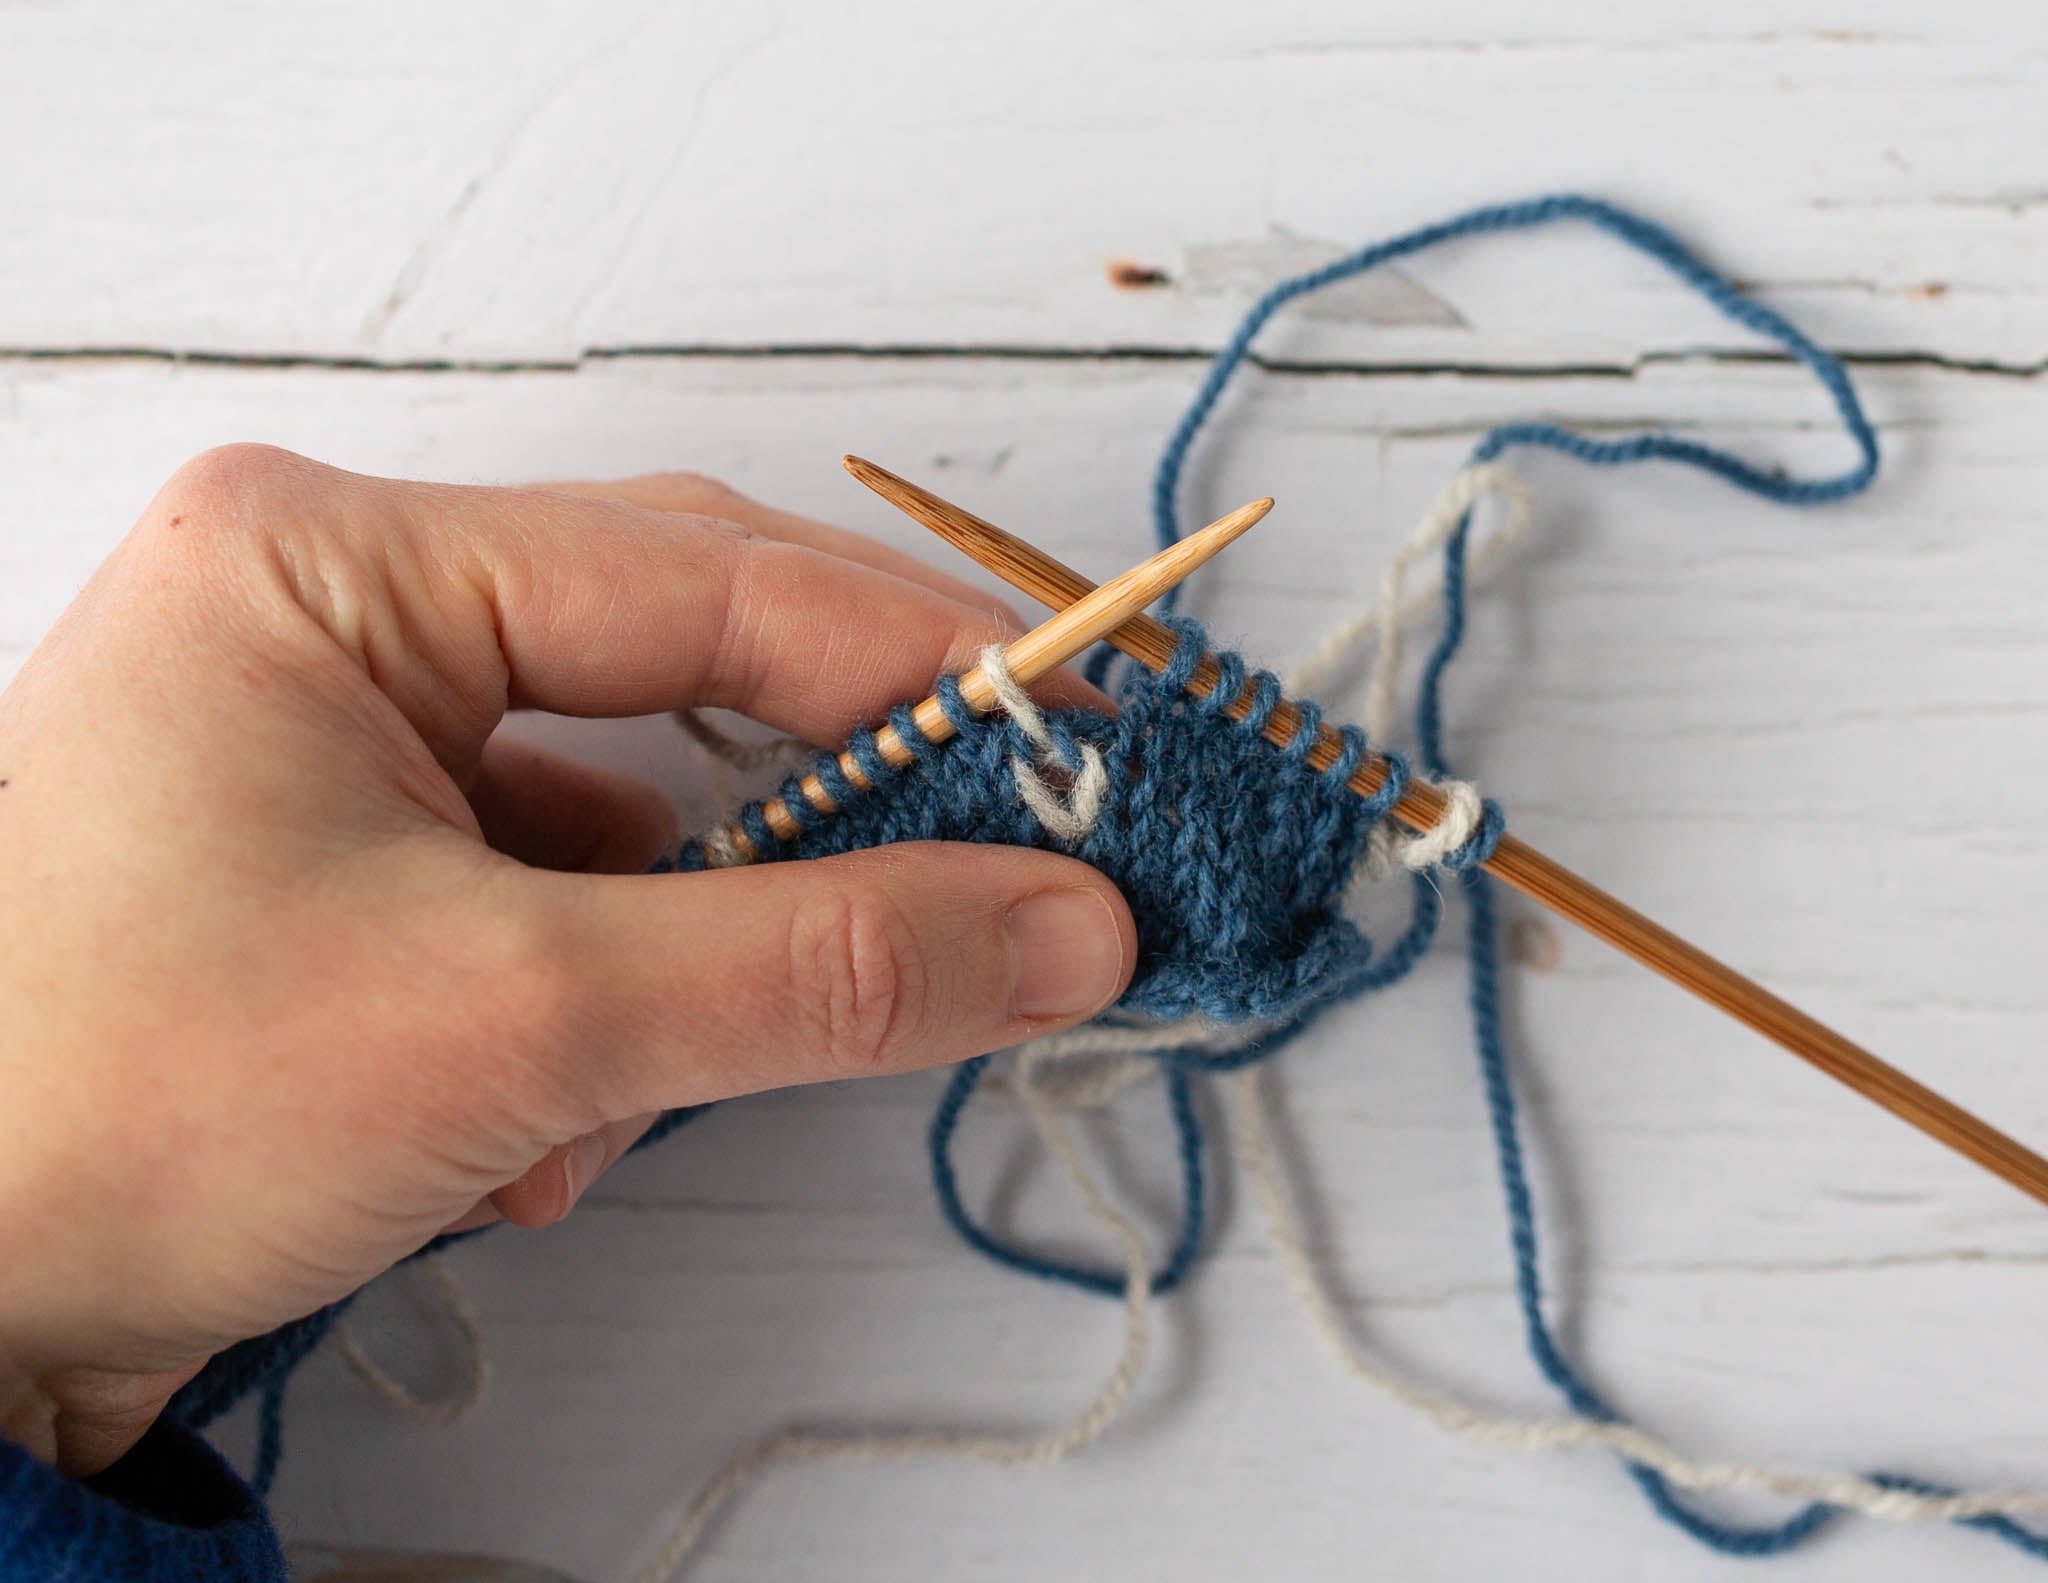 a white hand in the left of the image holds a small piece of blue and white knitting, still on wooden needles with strands of working yarn looped around behind on a flat surface